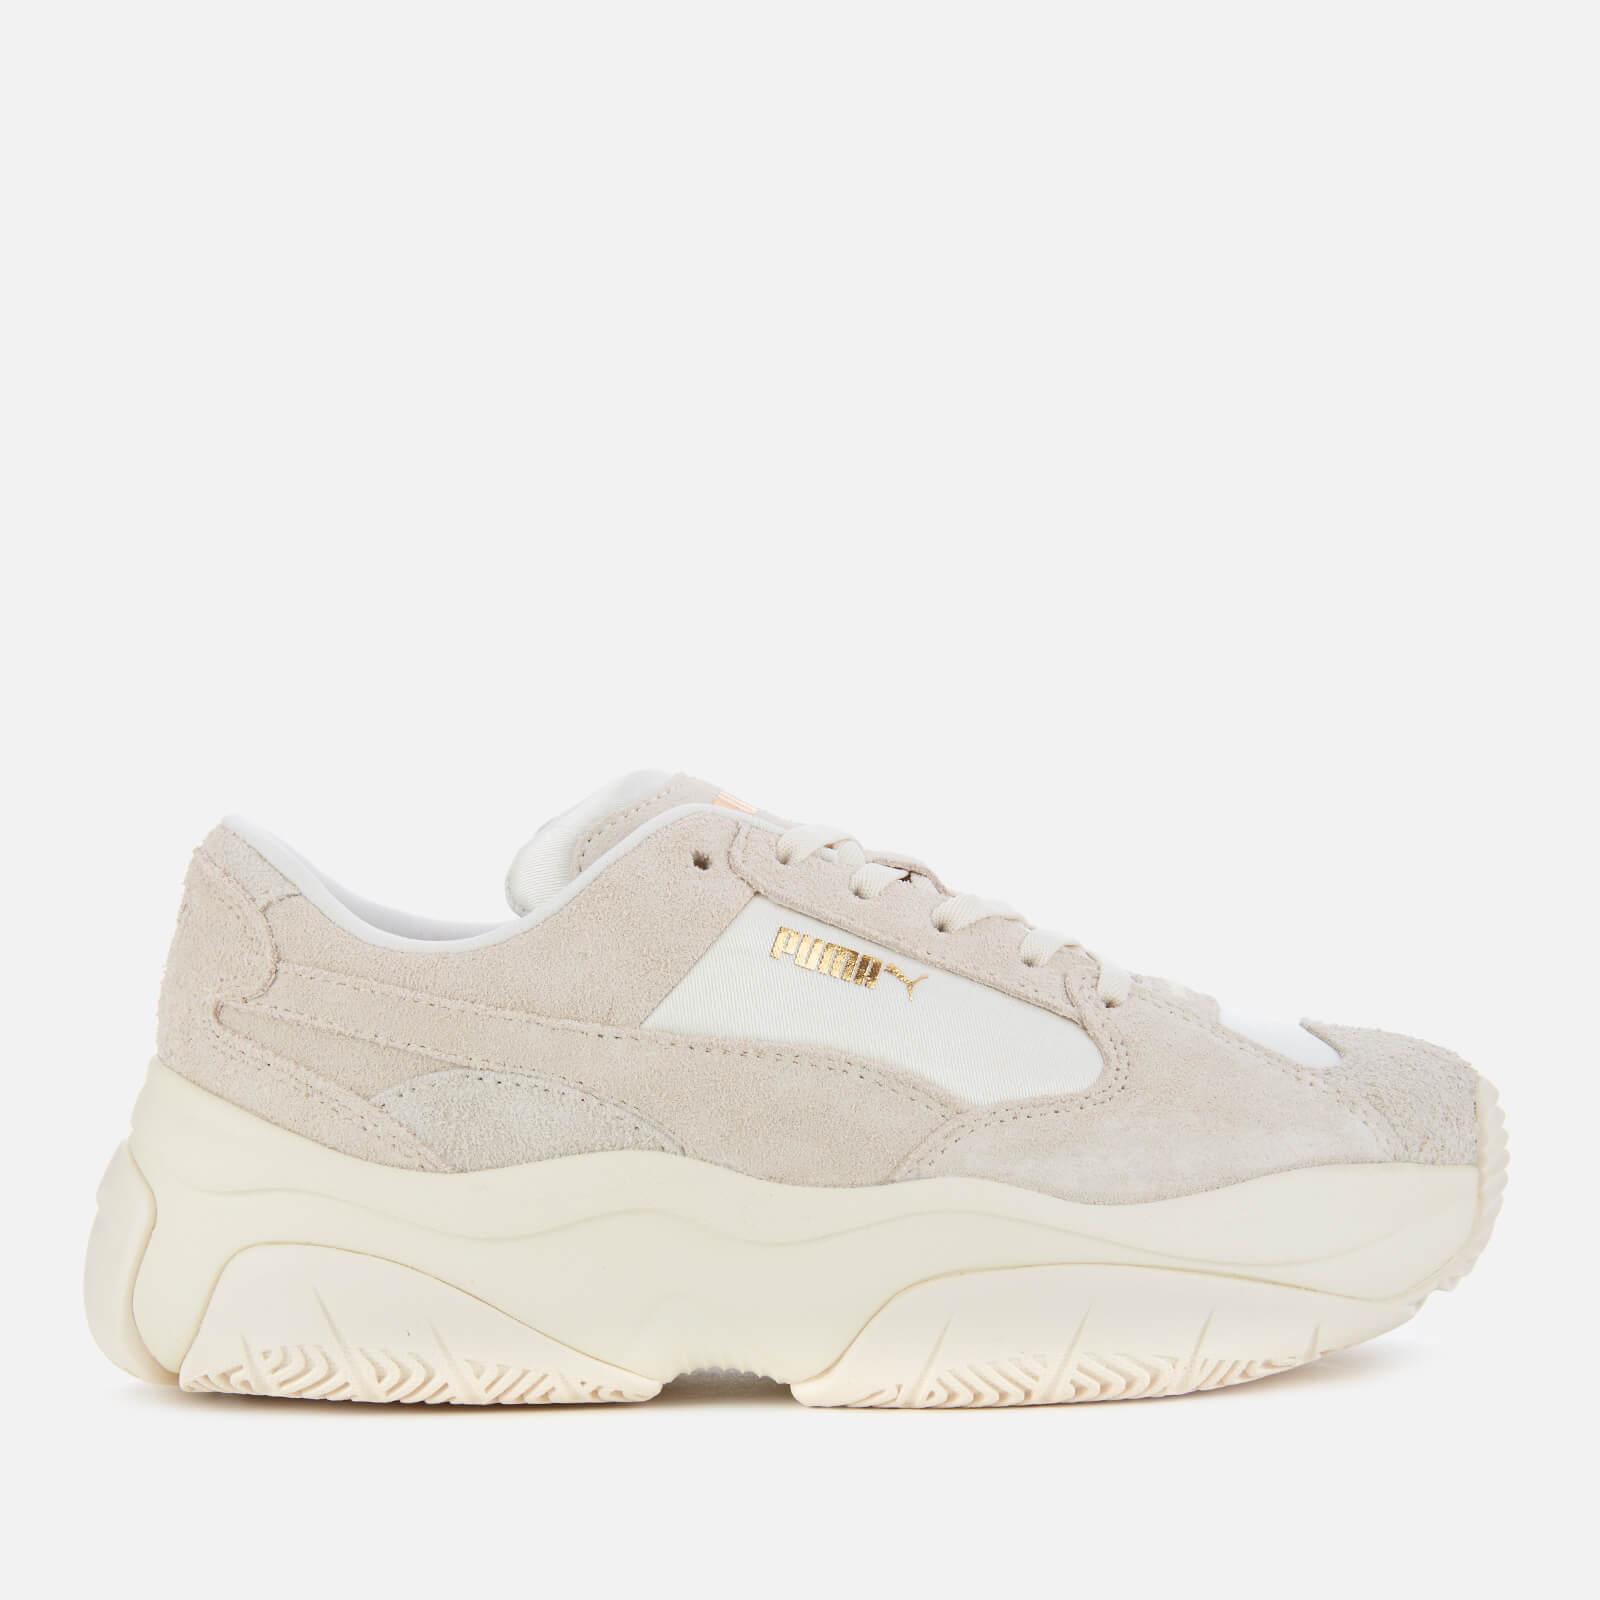 PUMA Suede Storm.y Soft Trainers in Beige (Natural) - Lyst